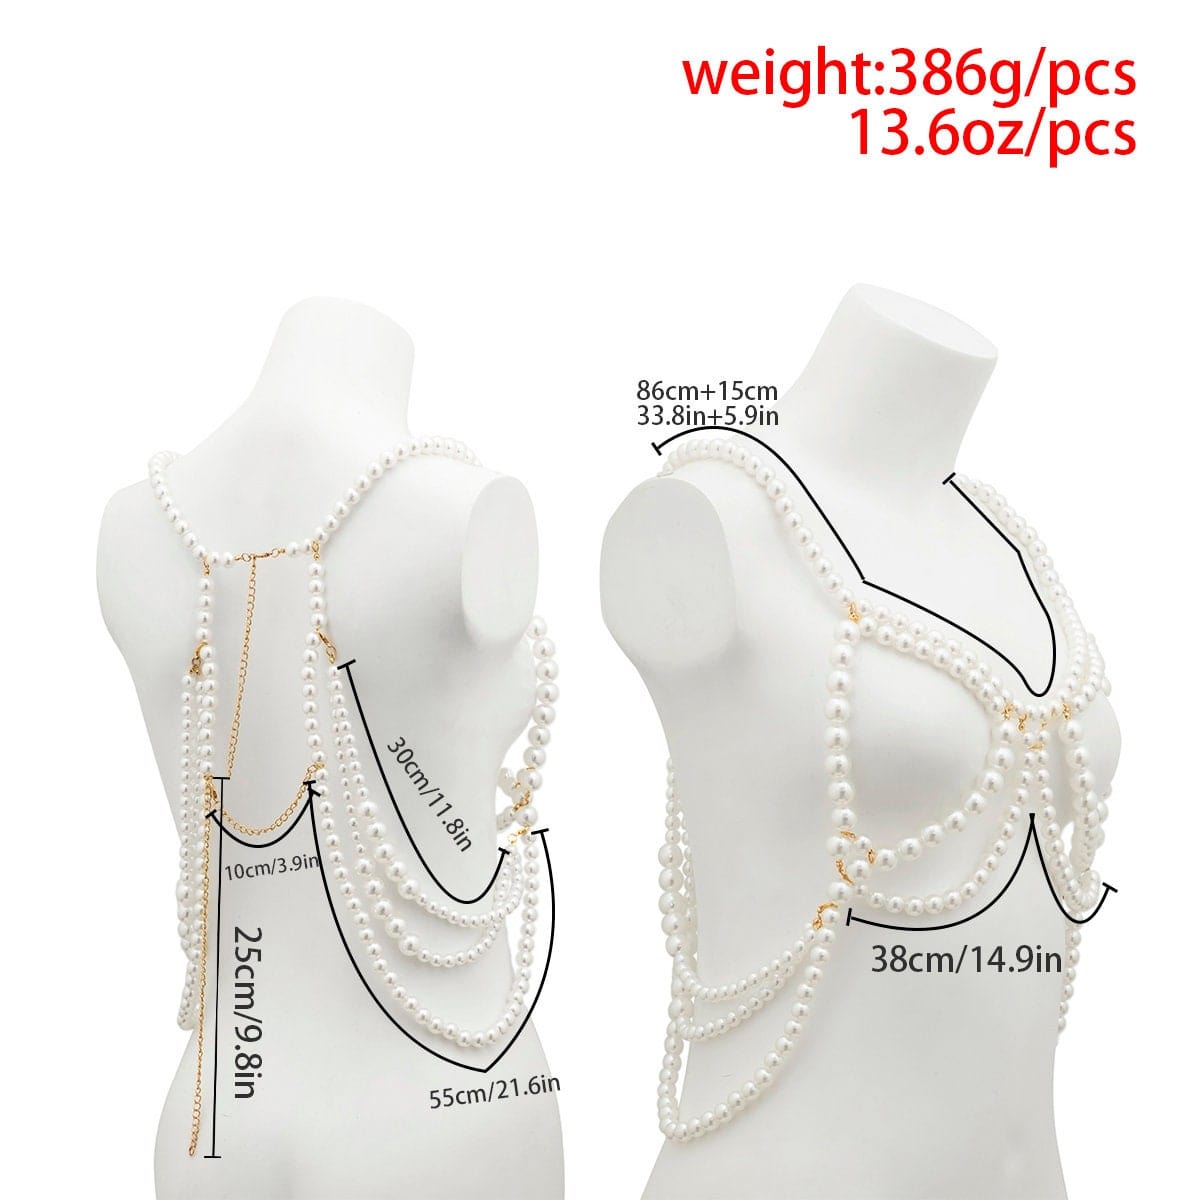  4 Pcs Non Piercing Bra Body Chain with Necklaces Body